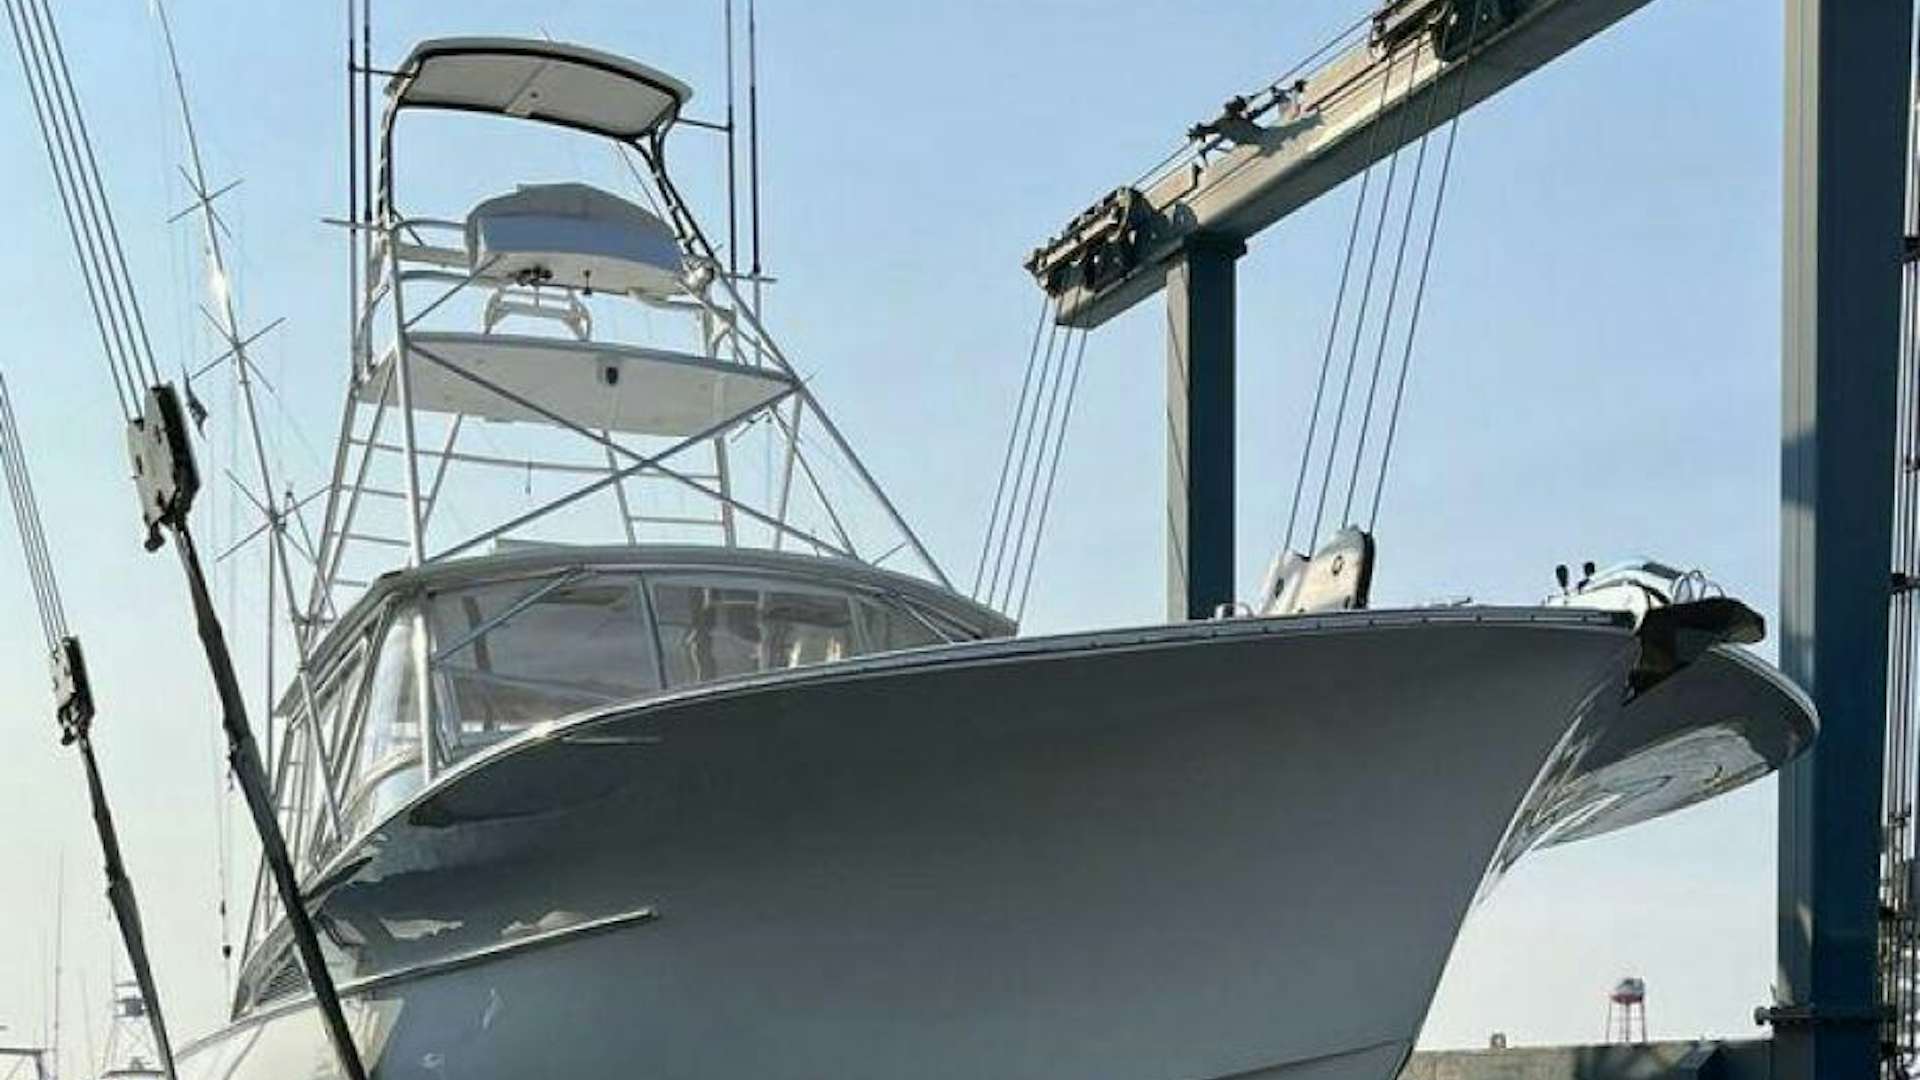 Close call
Yacht for Sale